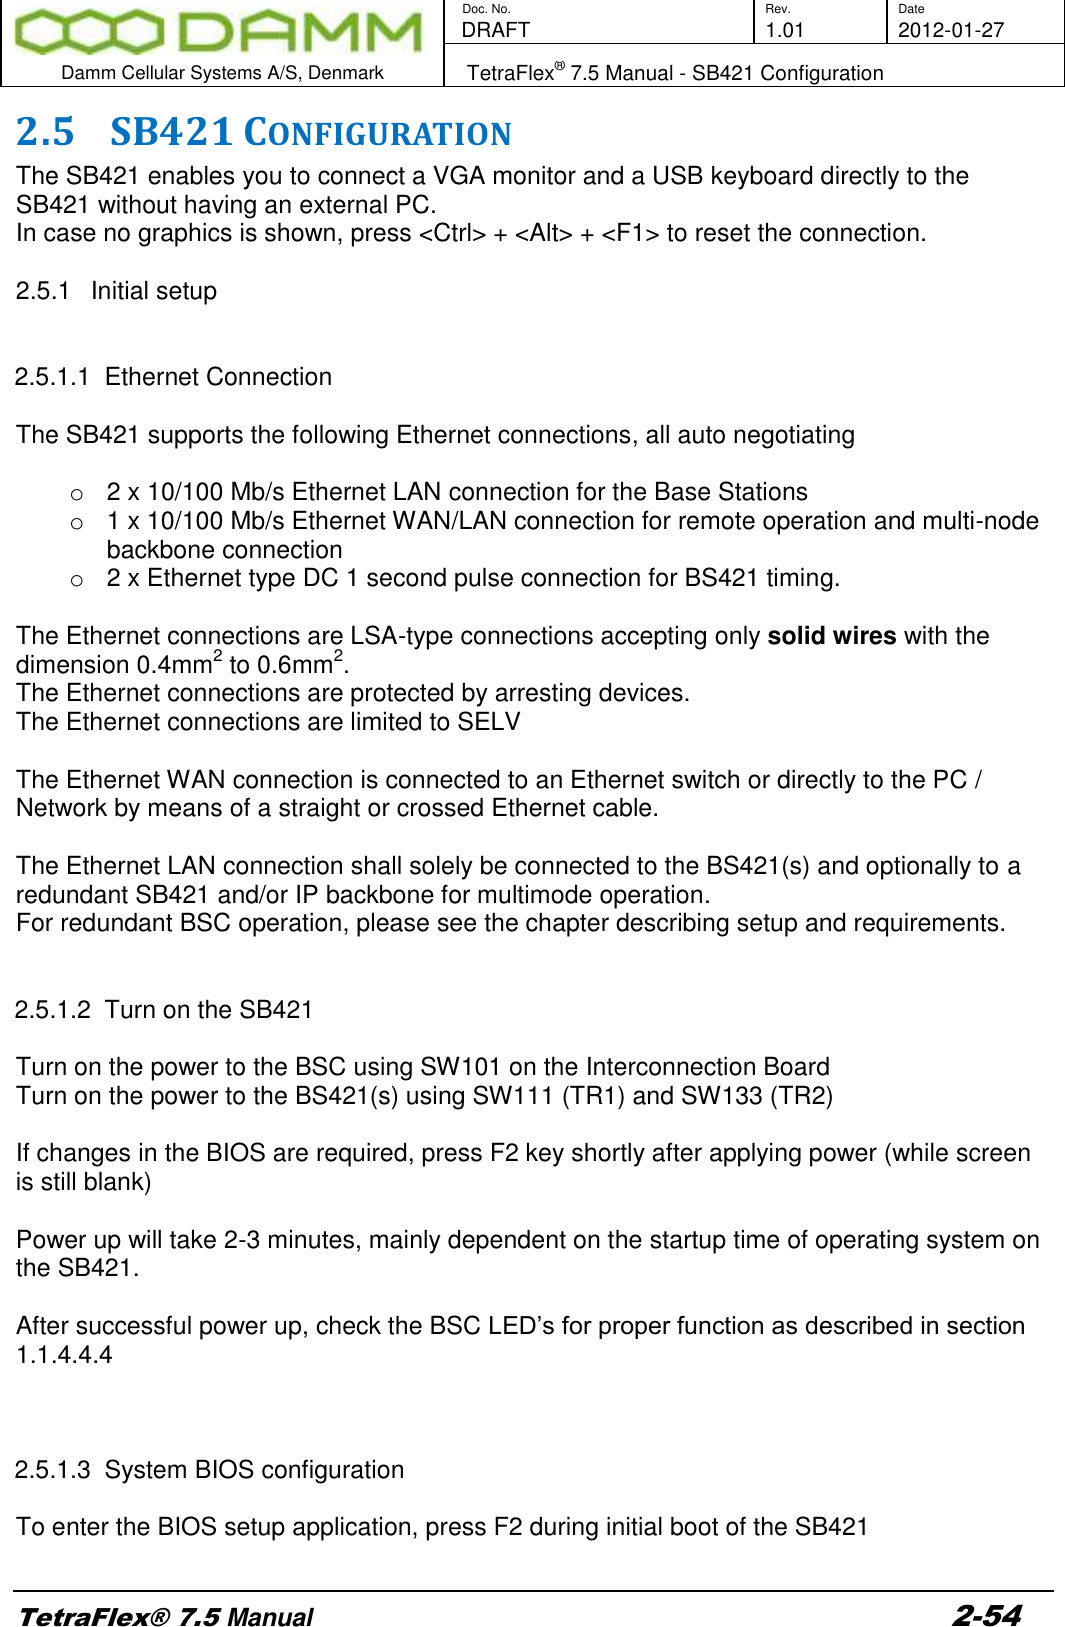        Doc. No. Rev. Date    DRAFT  1.01 2012-01-27  Damm Cellular Systems A/S, Denmark   TetraFlex® 7.5 Manual - SB421 Configuration  TetraFlex® 7.5 Manual 2-54 2.5 SB421 CONFIGURATION The SB421 enables you to connect a VGA monitor and a USB keyboard directly to the SB421 without having an external PC. In case no graphics is shown, press &lt;Ctrl&gt; + &lt;Alt&gt; + &lt;F1&gt; to reset the connection.  2.5.1  Initial setup   2.5.1.1  Ethernet Connection   The SB421 supports the following Ethernet connections, all auto negotiating  o  2 x 10/100 Mb/s Ethernet LAN connection for the Base Stations o  1 x 10/100 Mb/s Ethernet WAN/LAN connection for remote operation and multi-node backbone connection o  2 x Ethernet type DC 1 second pulse connection for BS421 timing.   The Ethernet connections are LSA-type connections accepting only solid wires with the dimension 0.4mm2 to 0.6mm2.  The Ethernet connections are protected by arresting devices. The Ethernet connections are limited to SELV  The Ethernet WAN connection is connected to an Ethernet switch or directly to the PC / Network by means of a straight or crossed Ethernet cable.  The Ethernet LAN connection shall solely be connected to the BS421(s) and optionally to a redundant SB421 and/or IP backbone for multimode operation.  For redundant BSC operation, please see the chapter describing setup and requirements.    2.5.1.2  Turn on the SB421  Turn on the power to the BSC using SW101 on the Interconnection Board Turn on the power to the BS421(s) using SW111 (TR1) and SW133 (TR2)  If changes in the BIOS are required, press F2 key shortly after applying power (while screen is still blank)  Power up will take 2-3 minutes, mainly dependent on the startup time of operating system on the SB421.  After successful power up, check the BSC LED’s for proper function as described in section 1.1.4.4.4     2.5.1.3  System BIOS configuration  To enter the BIOS setup application, press F2 during initial boot of the SB421  